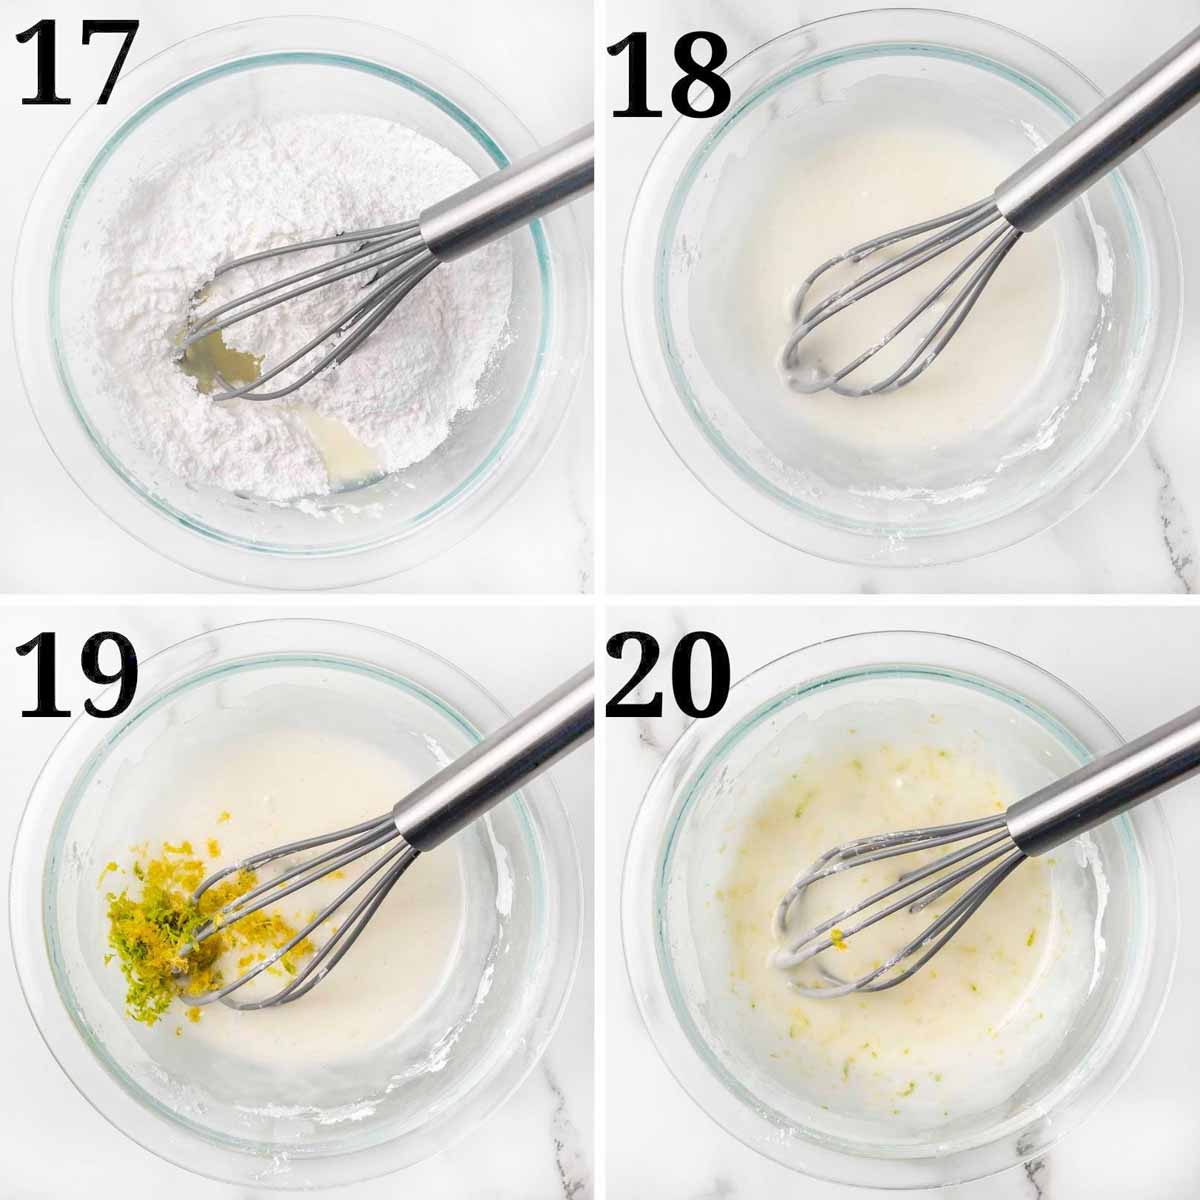 four images showing how to make a lemon lime glaze